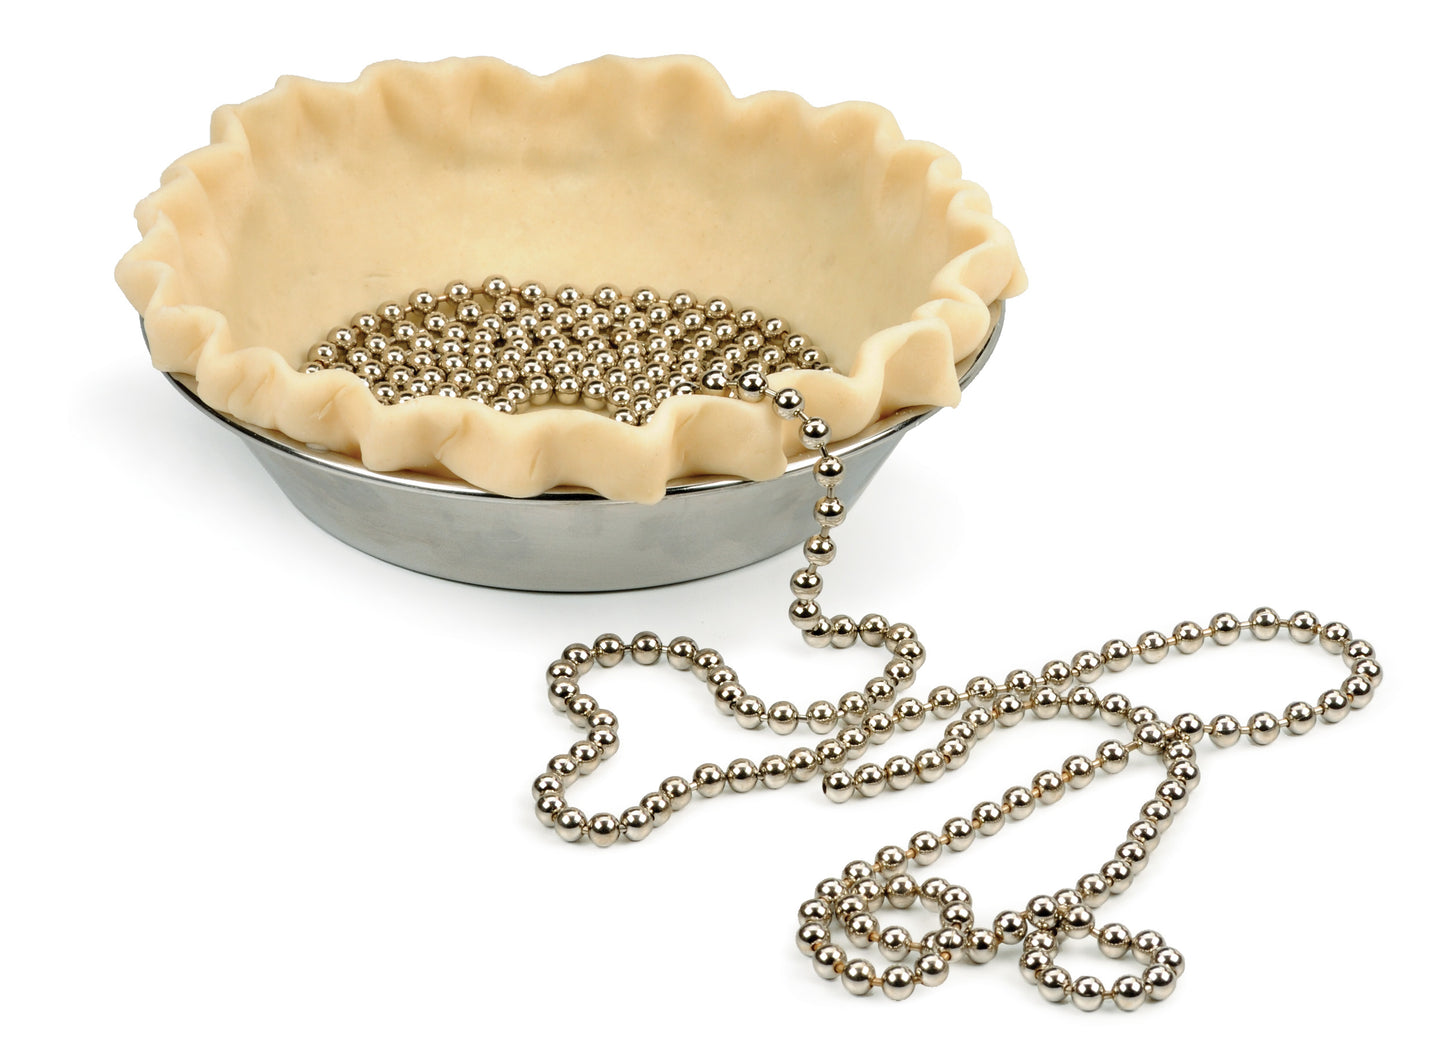 Endurance 10-Foot Stainless Steel Pie Chain